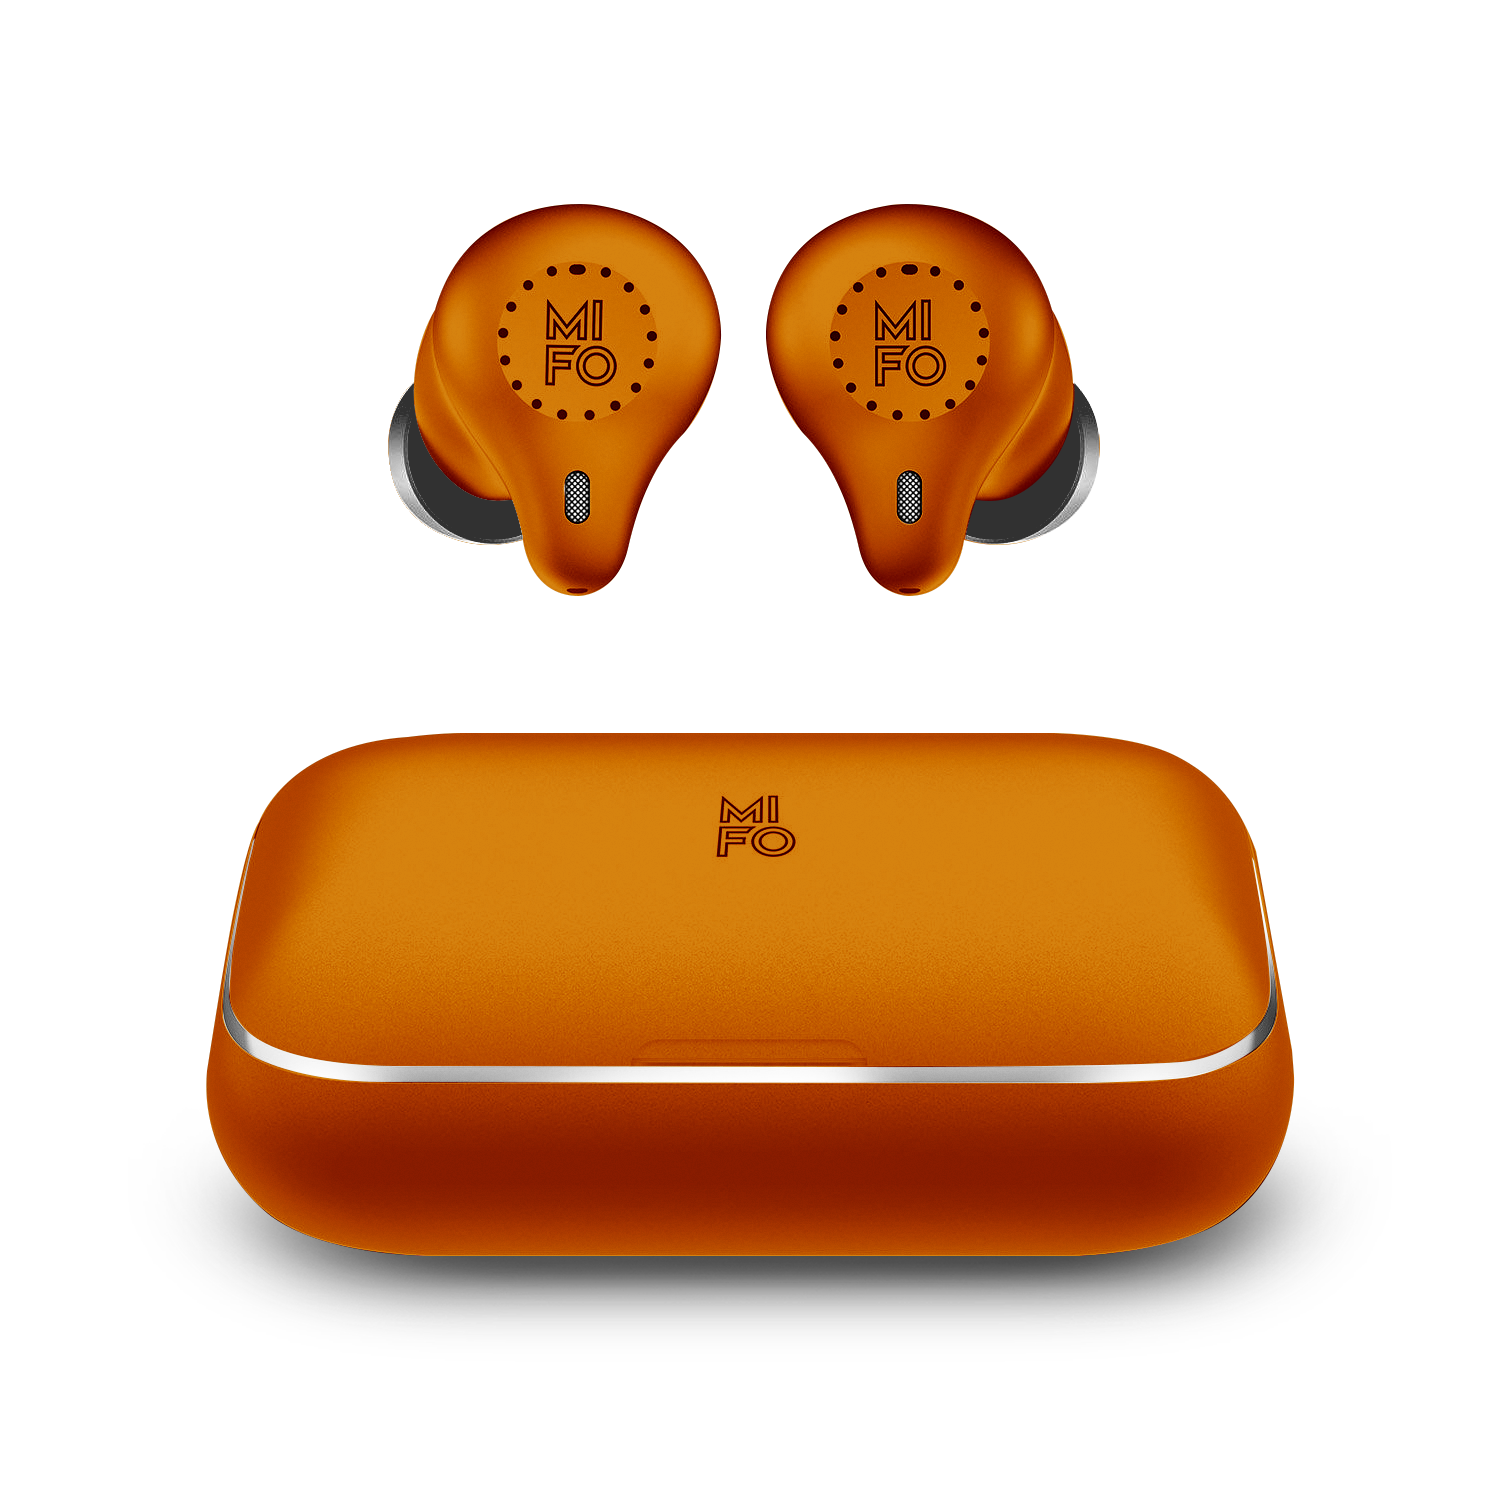 Electric Orange colored Touch Smart Wireless Earbuds - Mifo O5 Gen 2 Touch